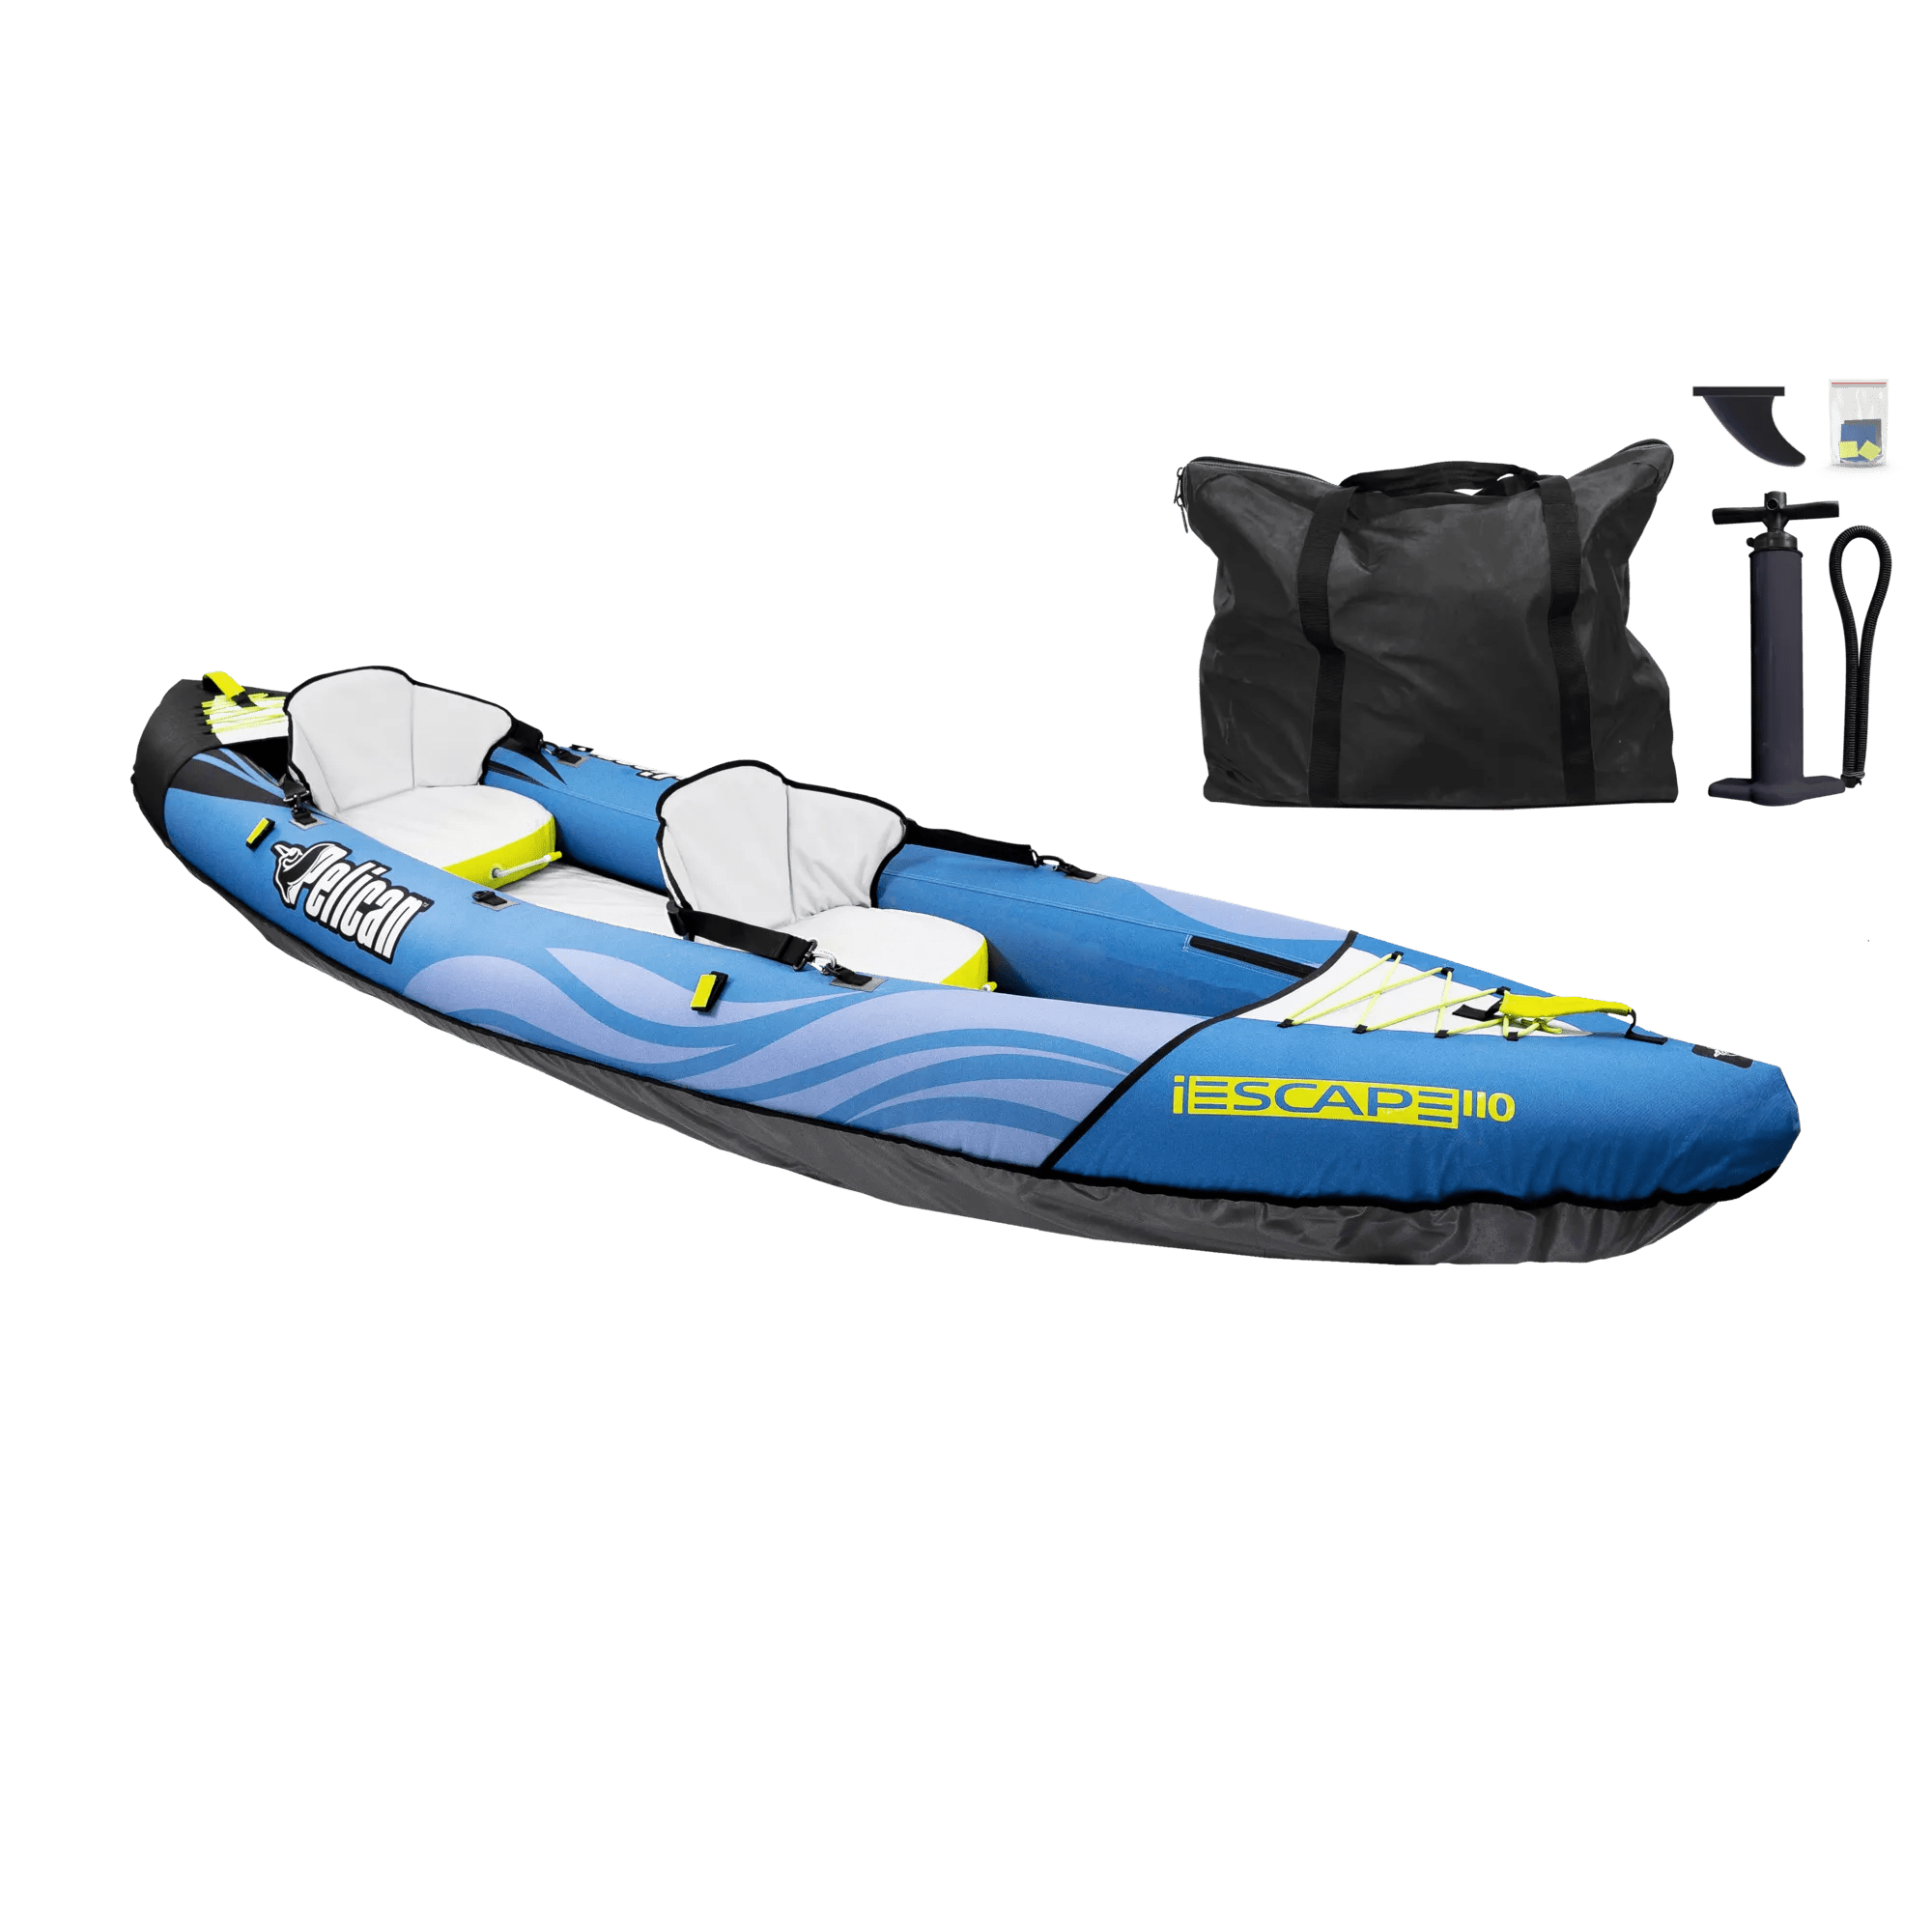 Confluence Outdoor  Shop Kayaks, Paddle Boards and Accessories